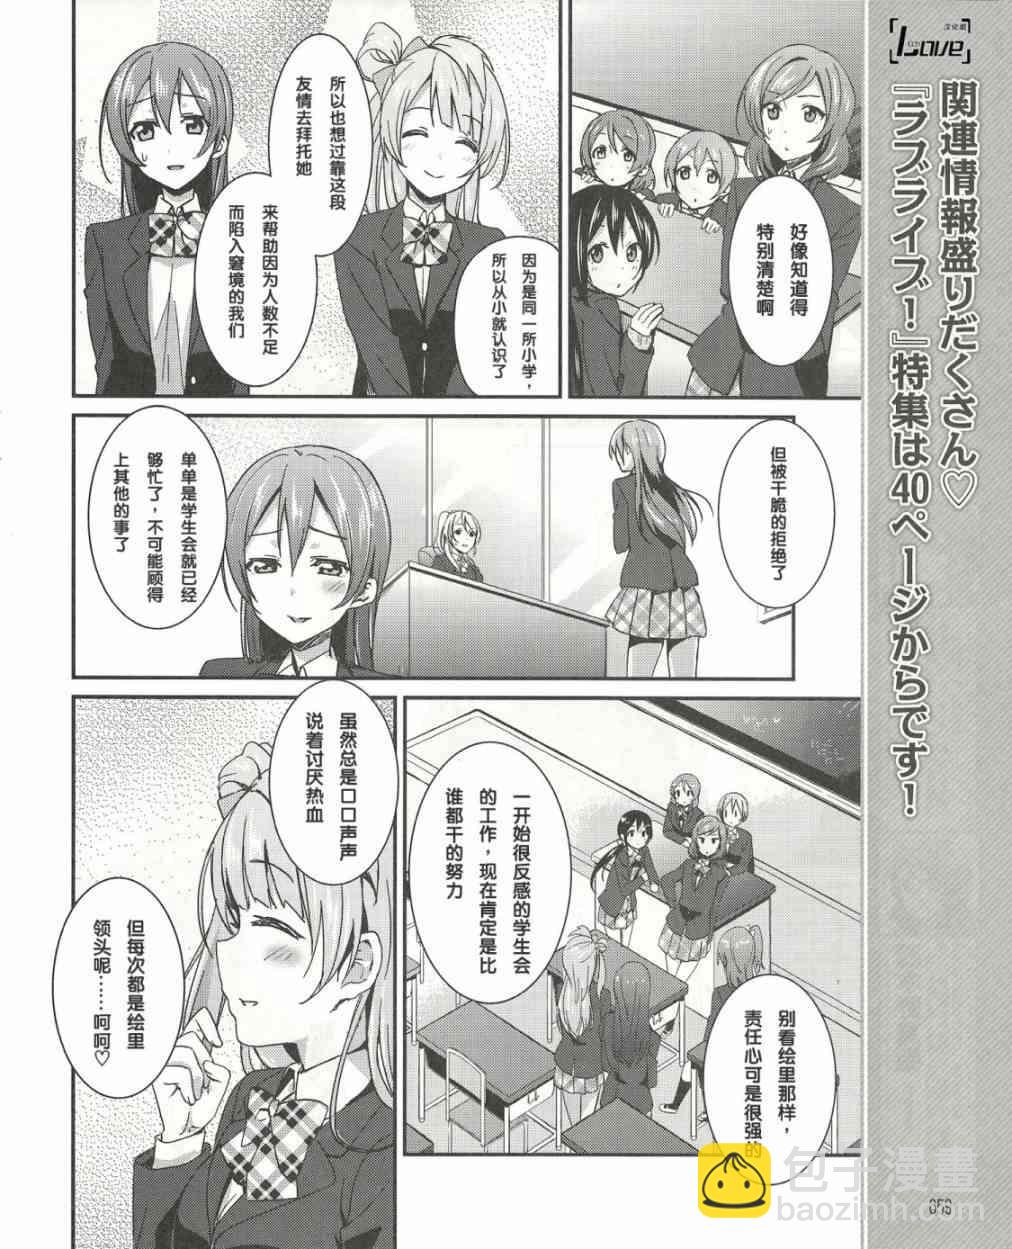 LoveLive - 15話 - 1